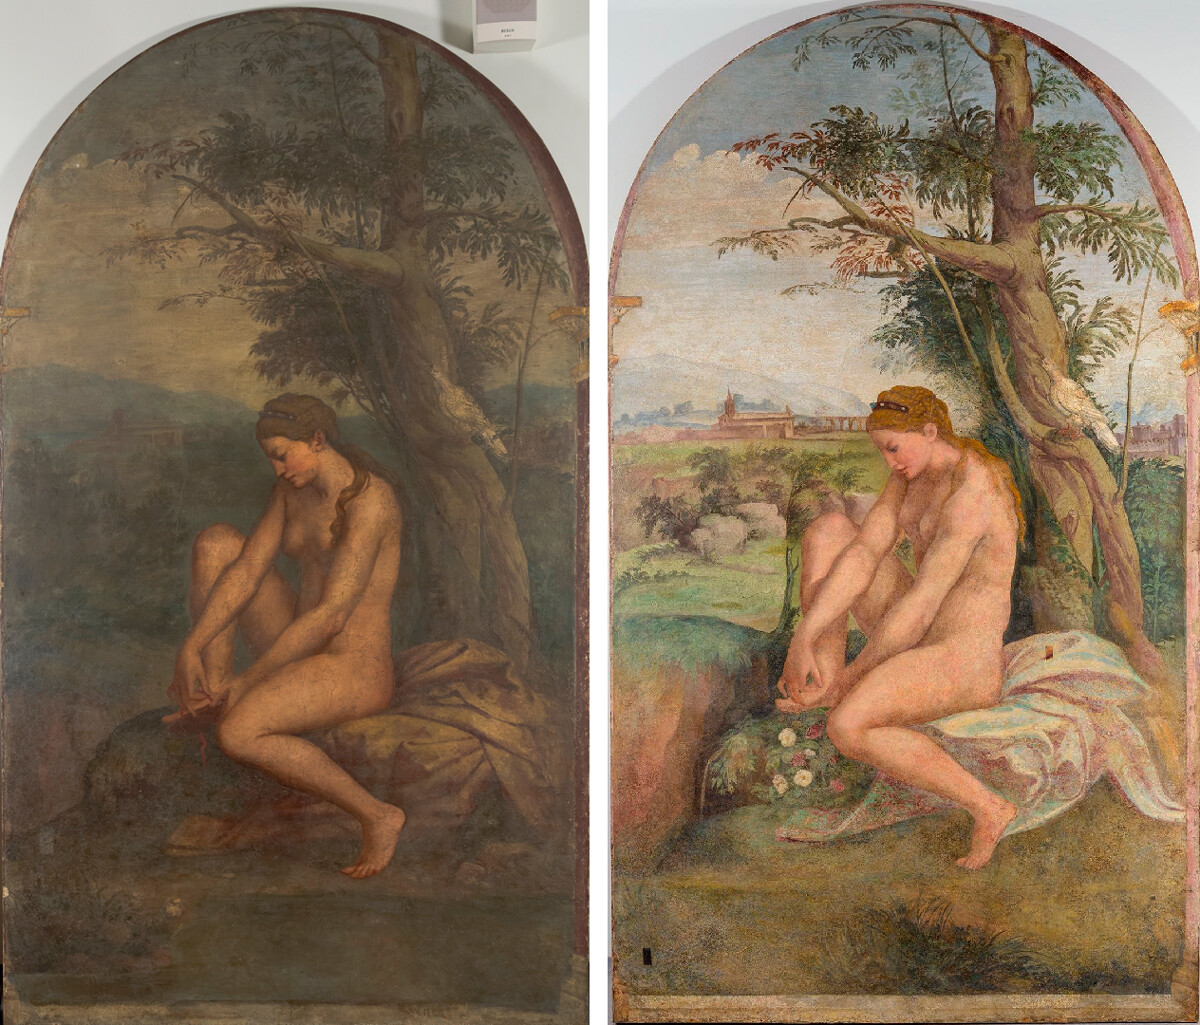 ‘Venus Loosening Her Sandal’ (before restoration) and ‘Venus Removing a Thorn from Her Foot’ (after restoration)